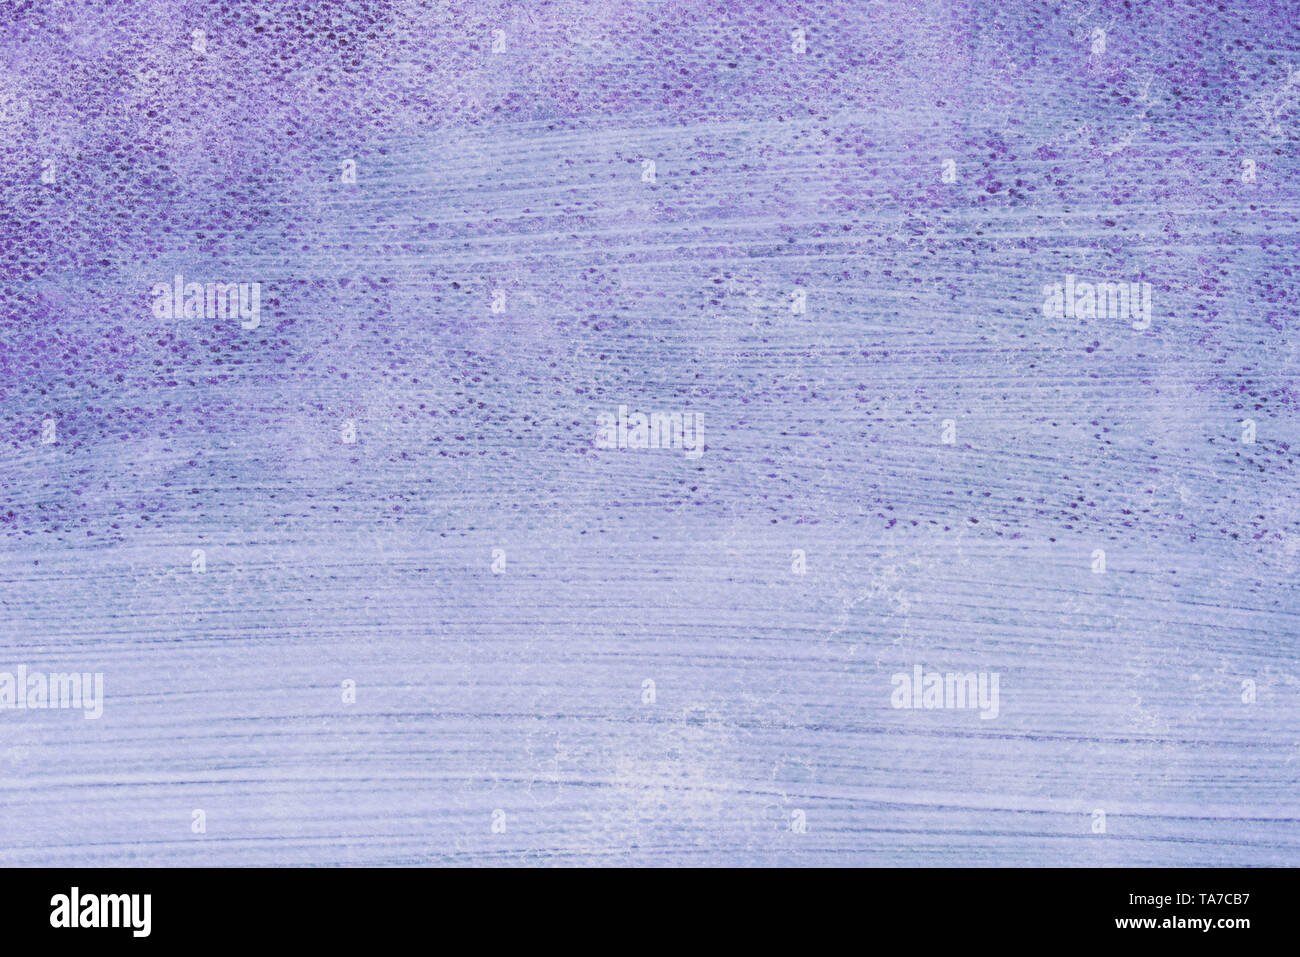 violet color acrylic painted on paper background texture Stock Photo